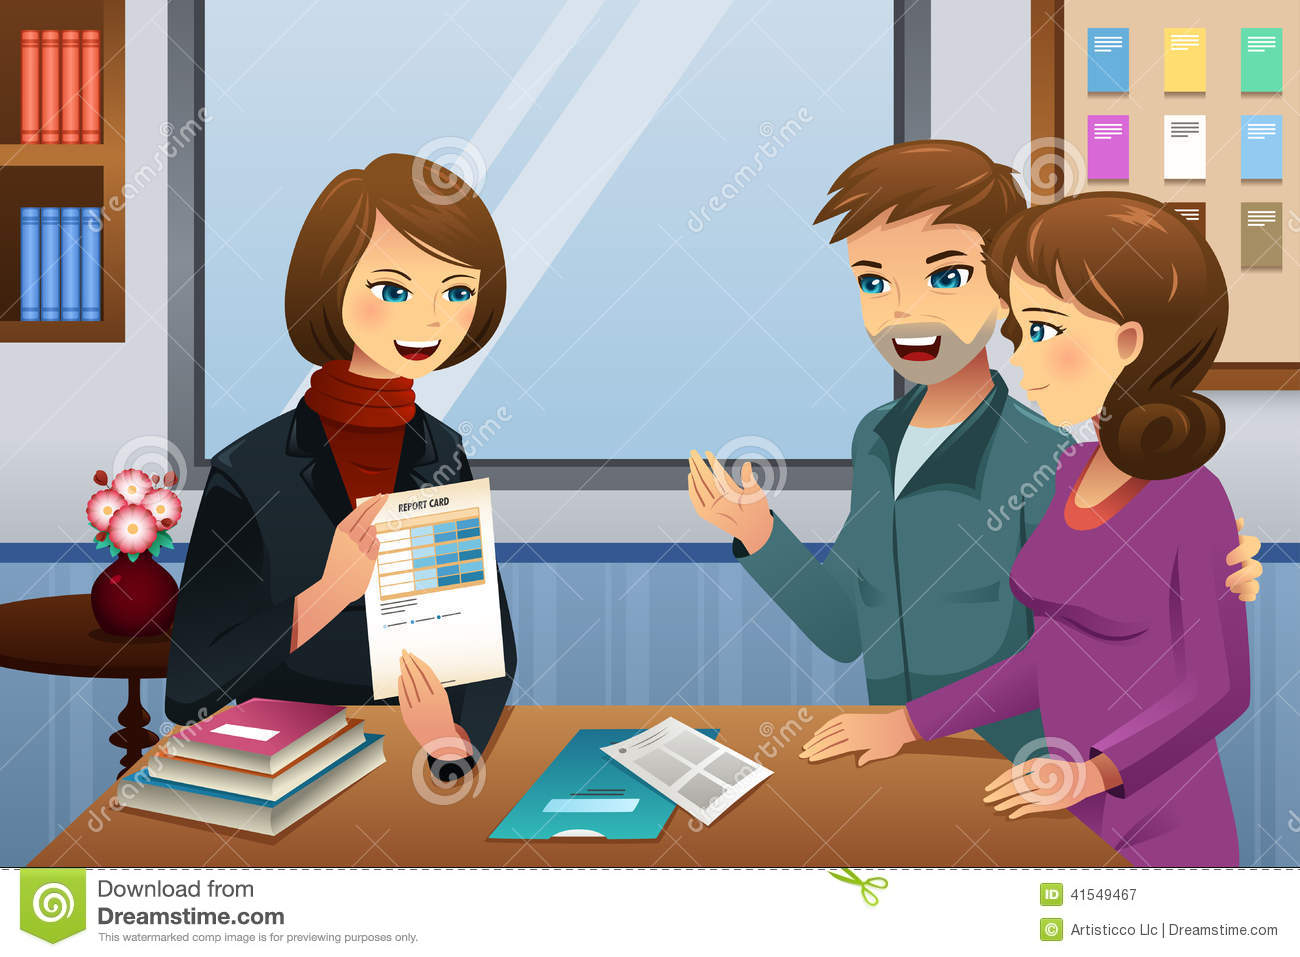 Vector Illustration Of Parents And Teacher Meeting Discussing The